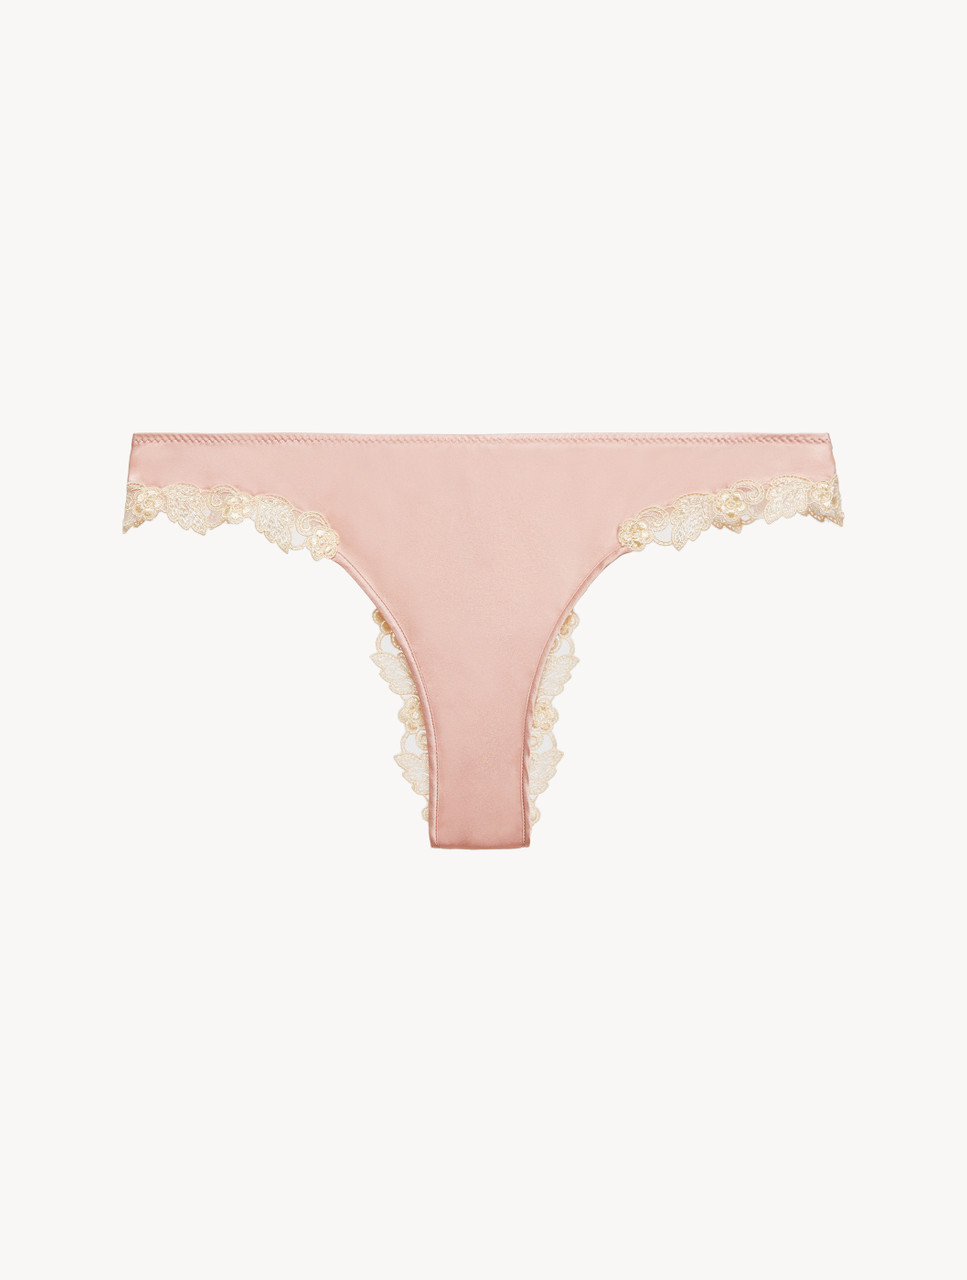 Brazilian Panty First Edition in pink